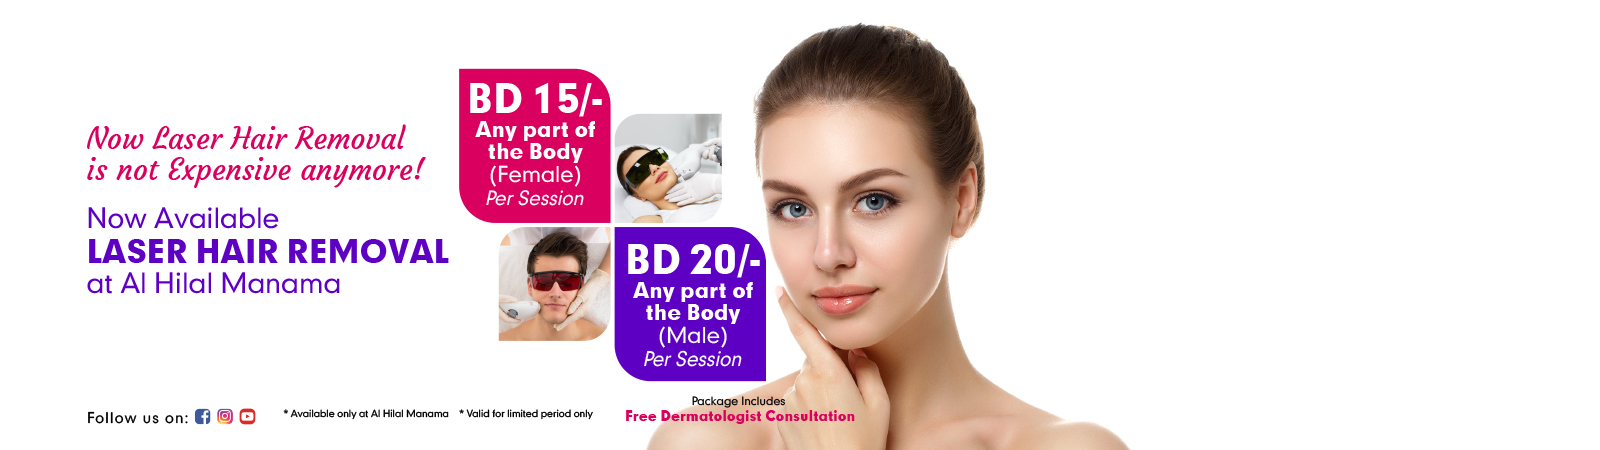 ALH-Website-Banner-Laser-Hair-Removal-Package-1600-x-450